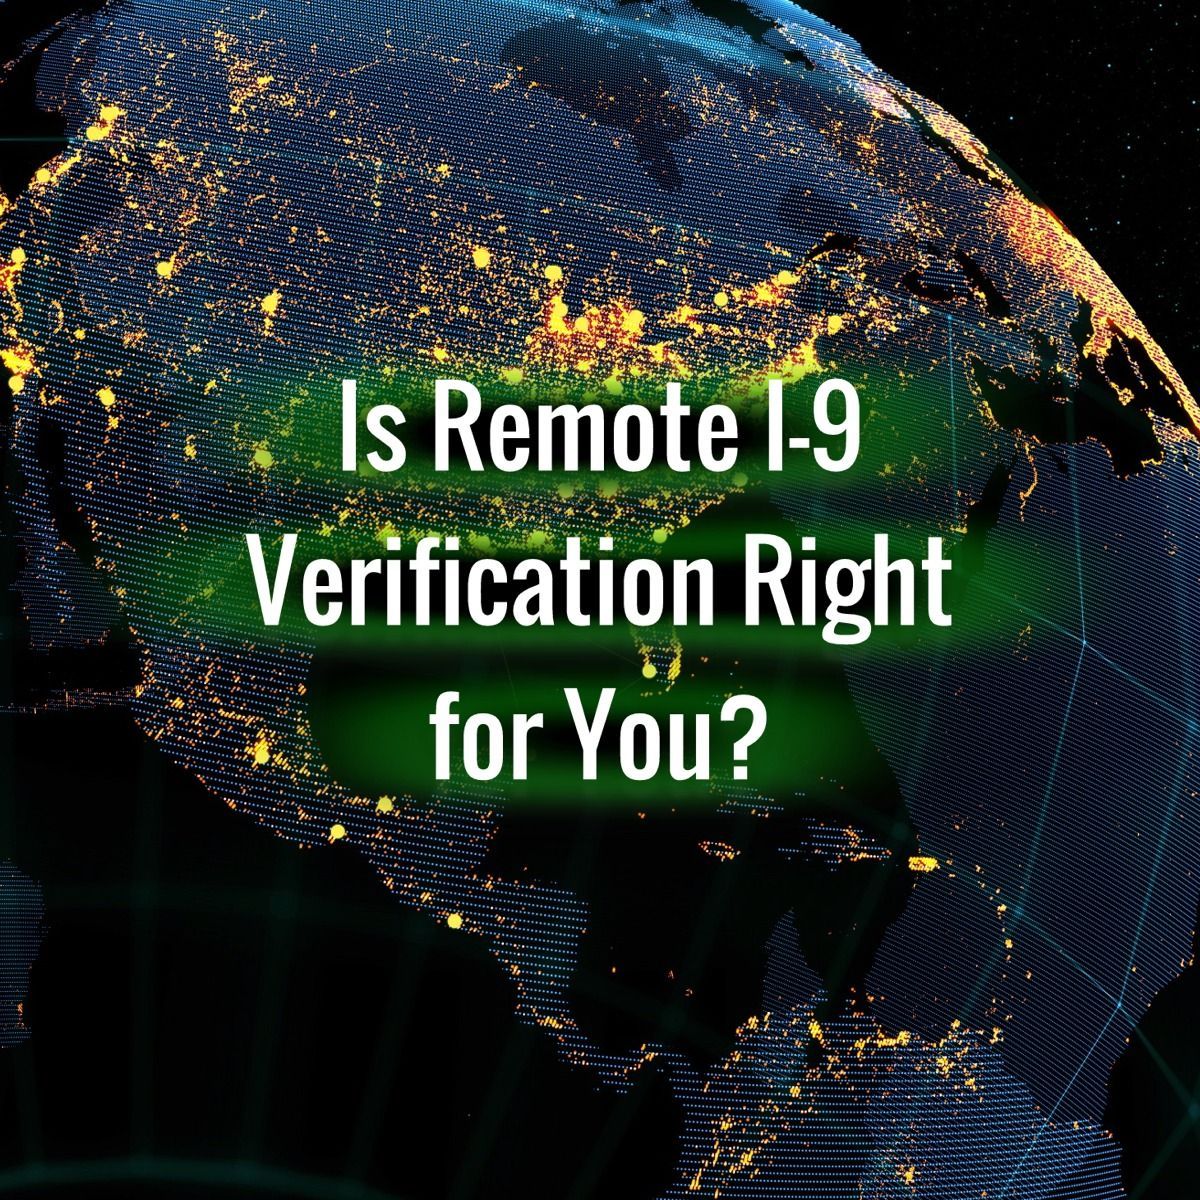 Is Remote I-9 Verification Right for You?